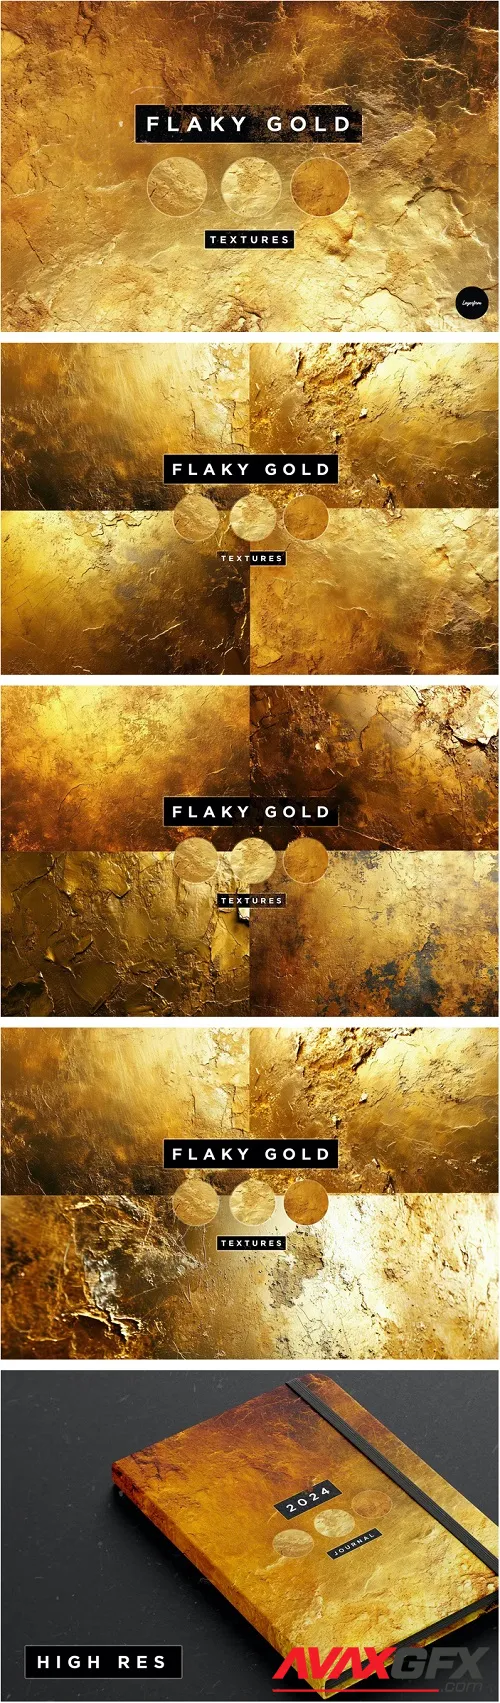 Flaky Gold Textures Pack - 91945114